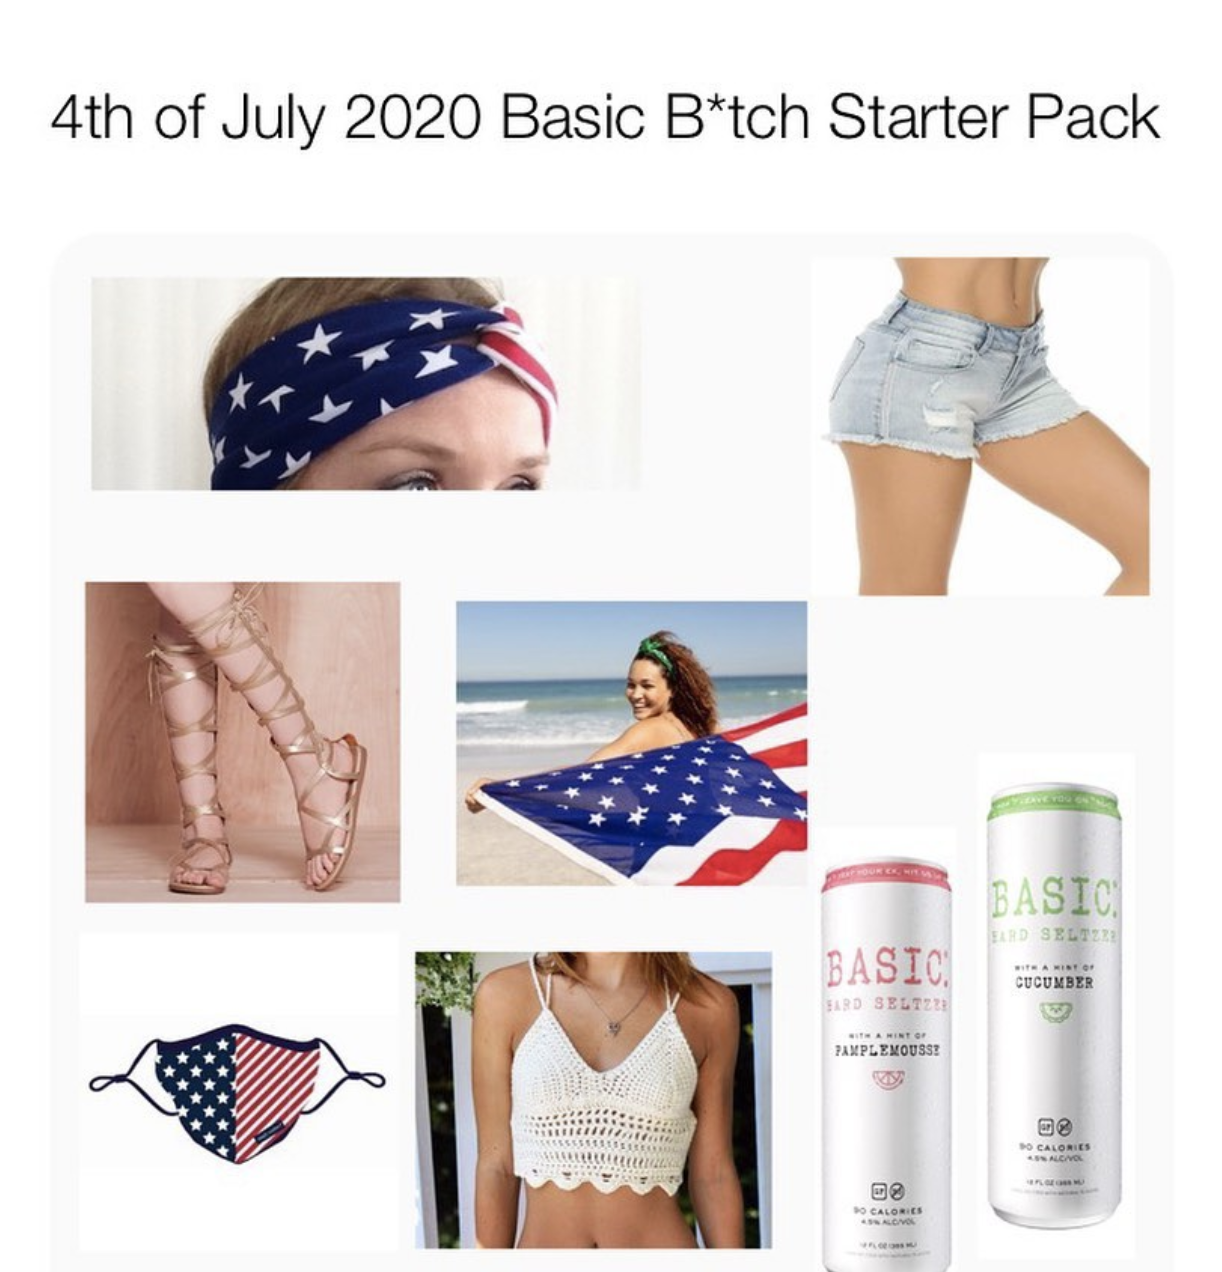 4th of july 2020 starter pack, 4th of july basic starter pack, 4th of july meme, fourth of july meme, 4th of july memes, funny fourth of july memes, funny 4th of july meme, 4th of july meme 2020, 4th of july memes 2020, 2020 4th of july meme, 2020 4th of july memes, funny 4th of july memes, 4th of july funny memes, funny happy 4th of july memes, funny memes 4th of july, hilarious 4th of july memes, independence day 2020 meme, independence day 2020 memes, 2020 independence day meme, quarantine 4th of july meme, coronavirus 4th of july meme, covid 4th of july meme, fourth of july memes, independence day meme, independence day memes, funny independence day meme, funny independence day memes, 4th of july 2020 meme, 4th of july 2020 memes